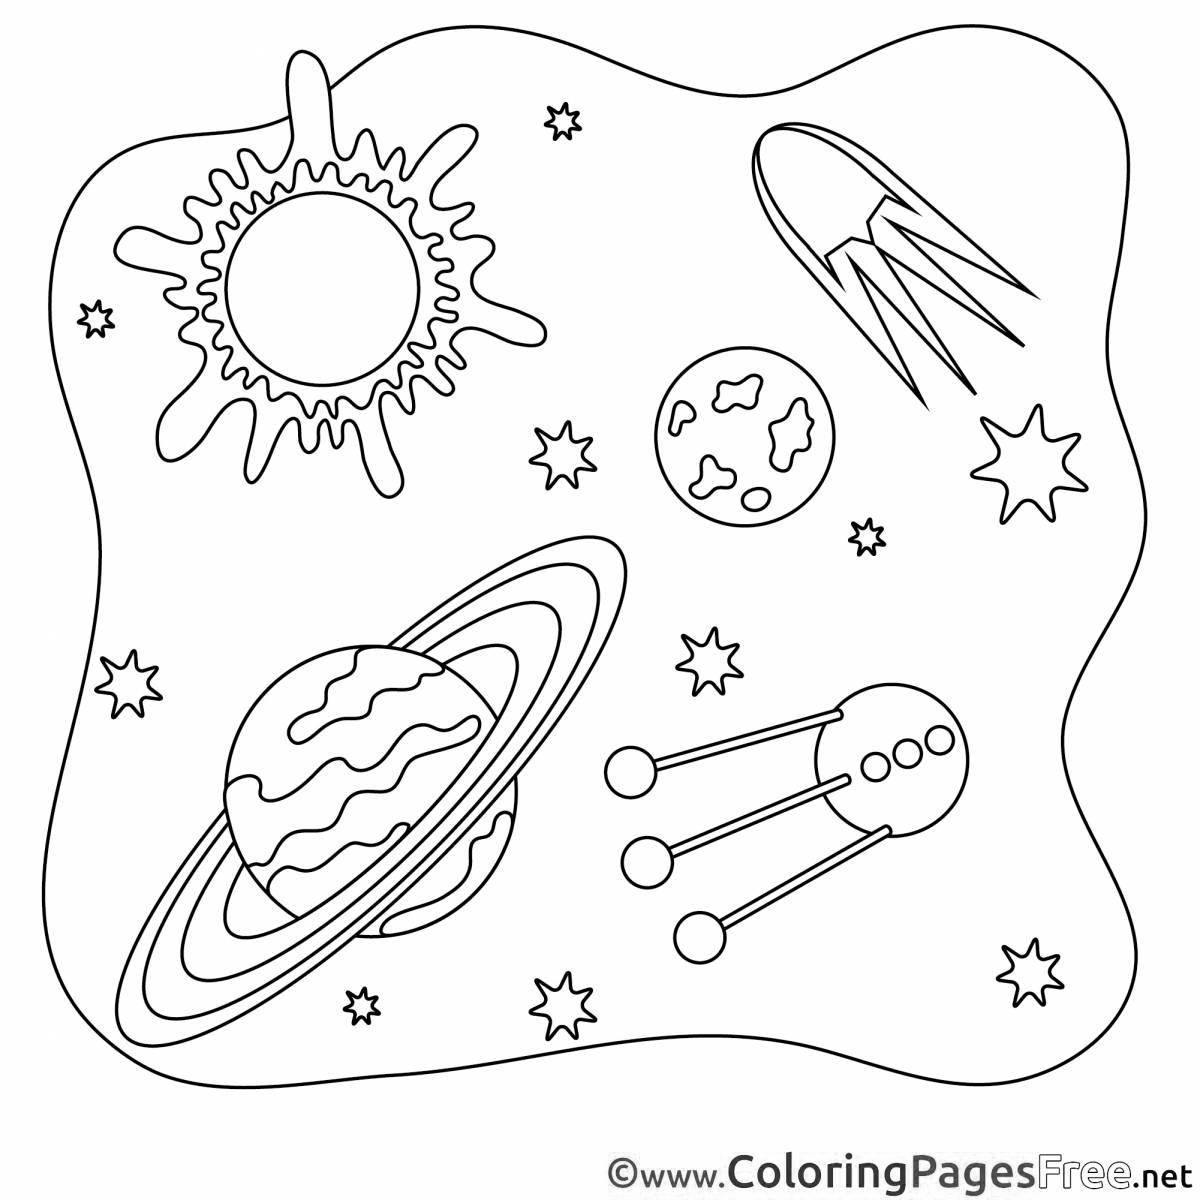 Glowing space coloring book for children 4-5 years old